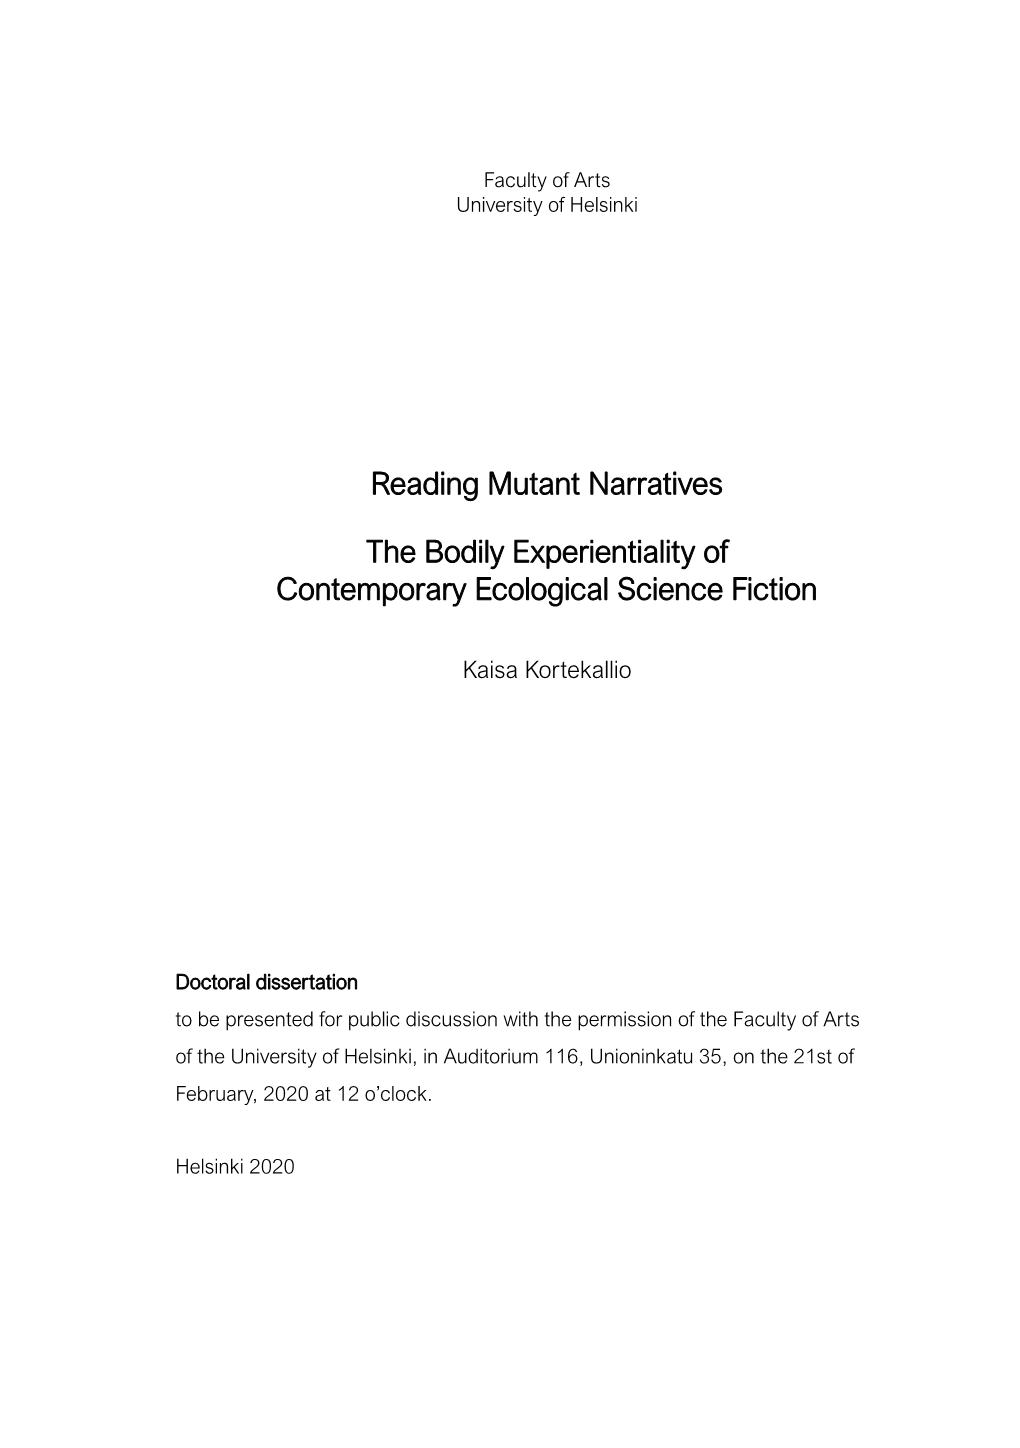 Reading Mutant Narratives: the Bodily Experientiality Of